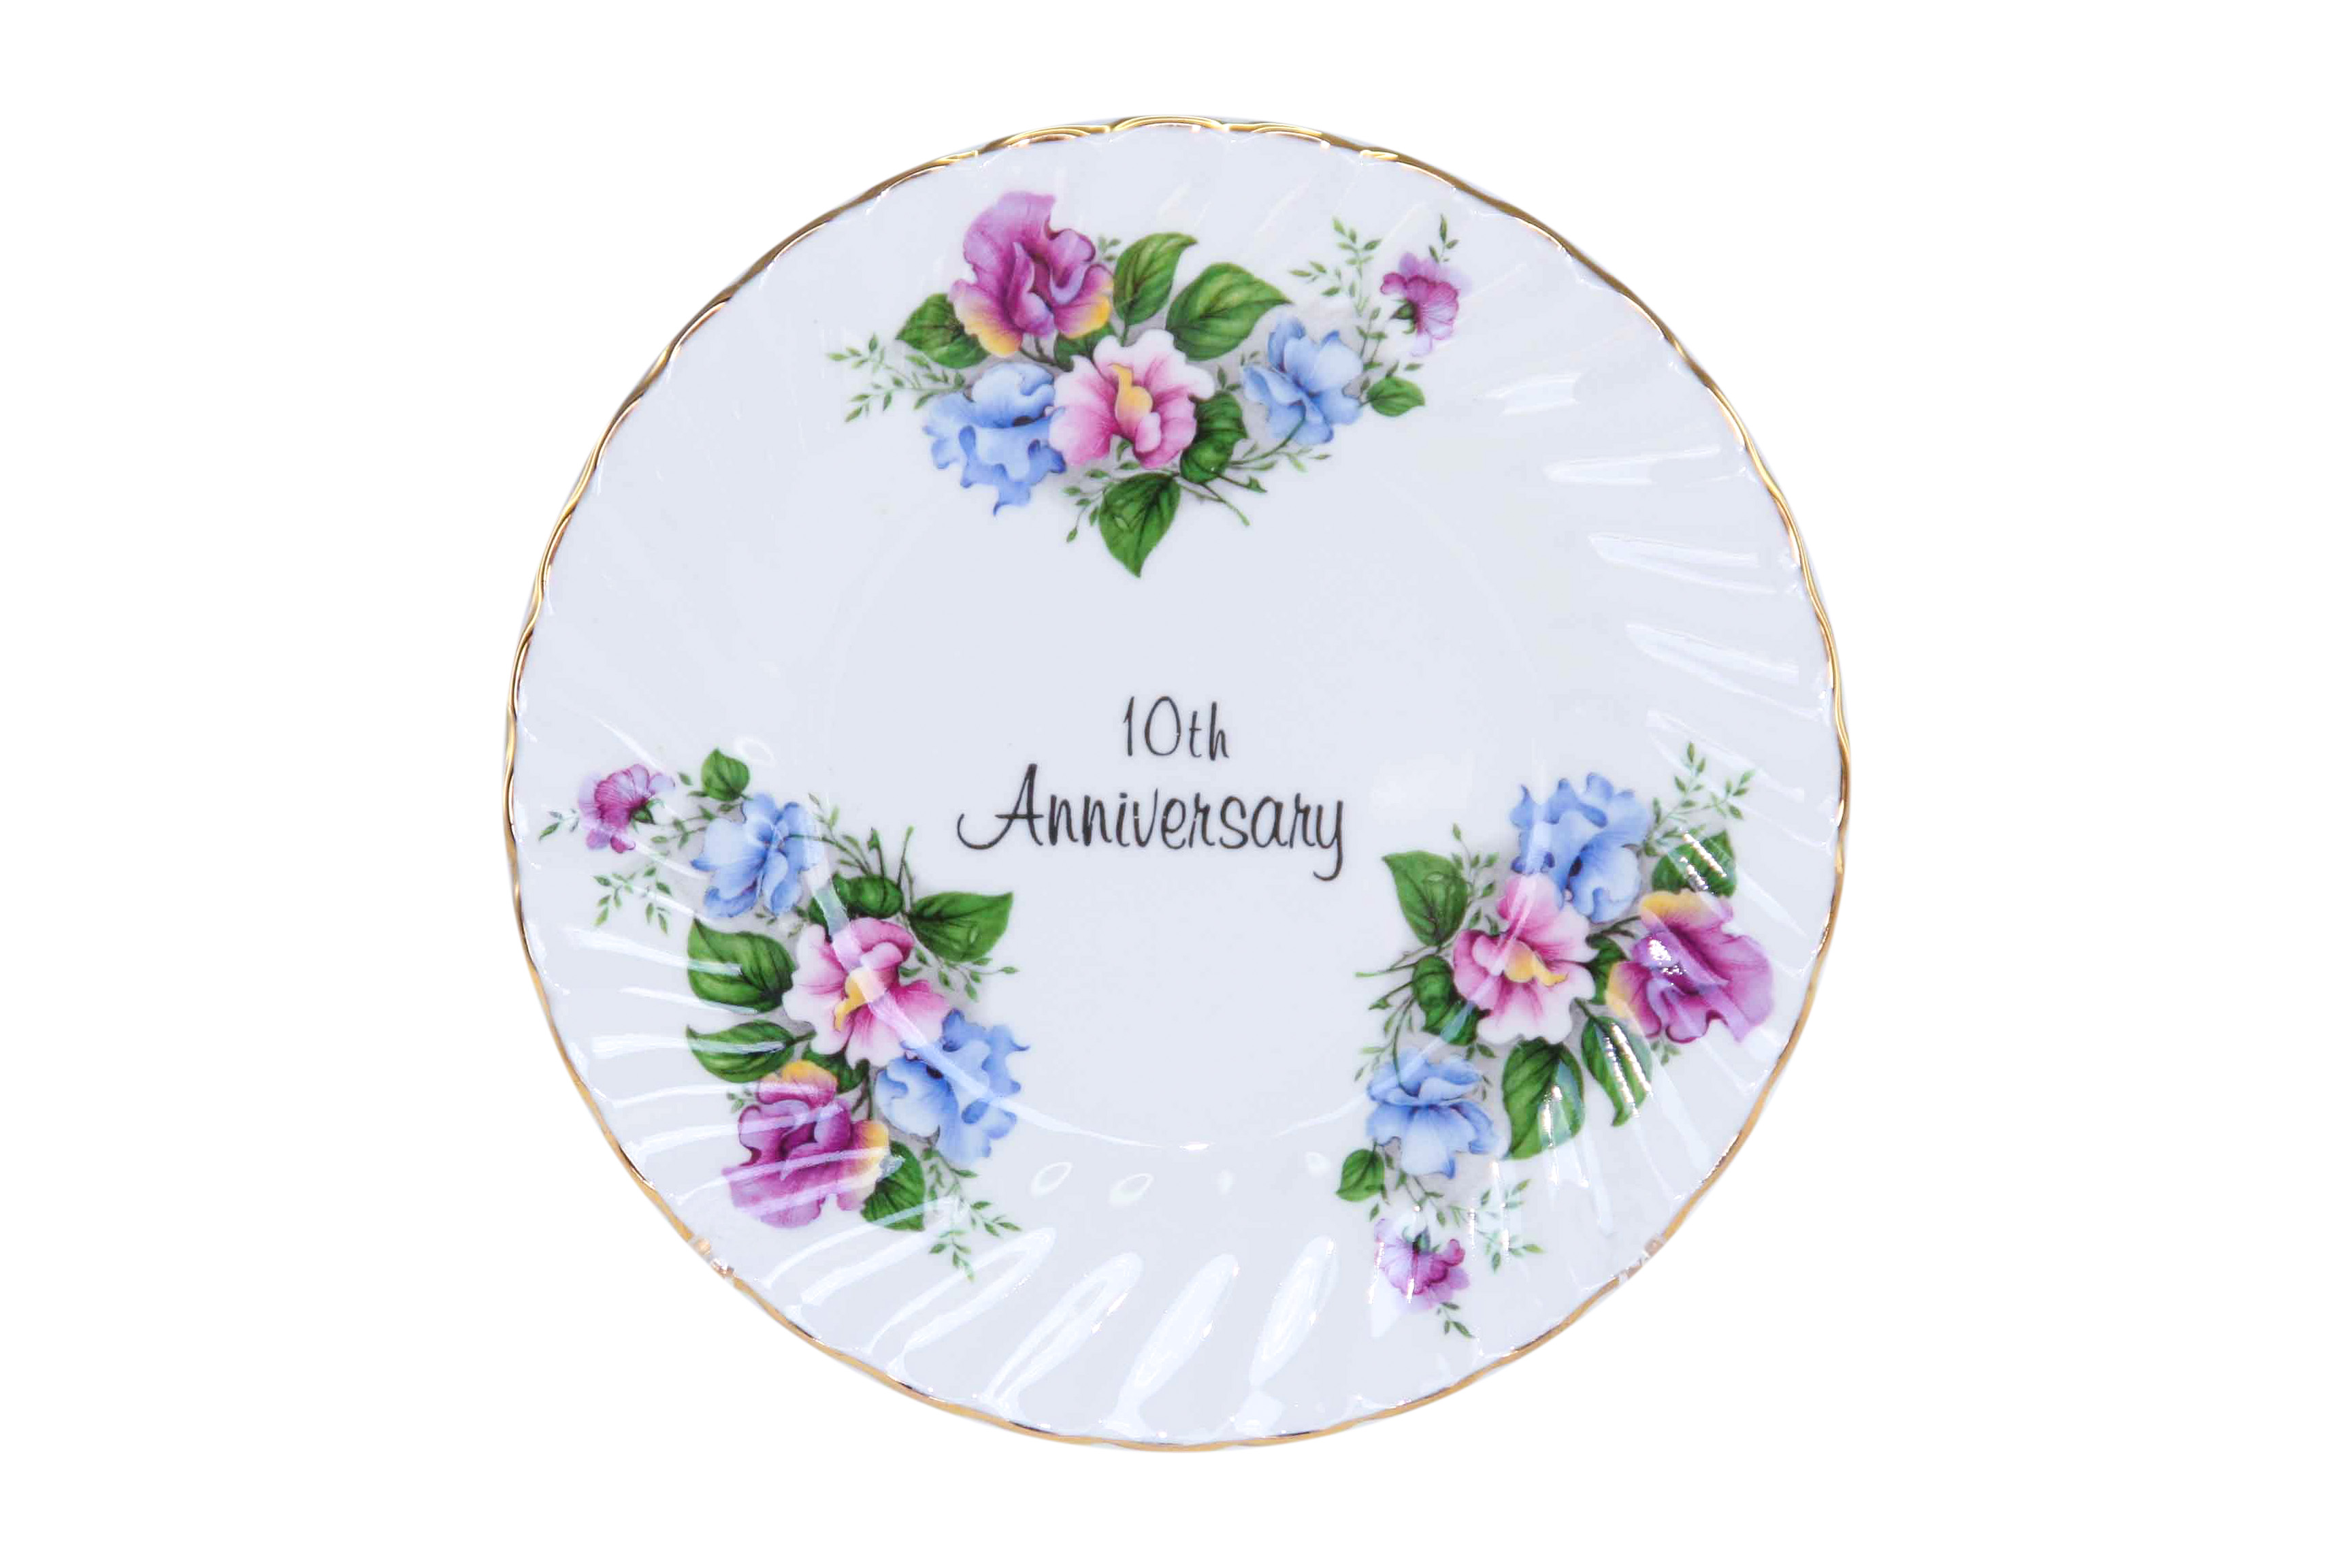 10th Anniversary Plate (6 inch) with stand